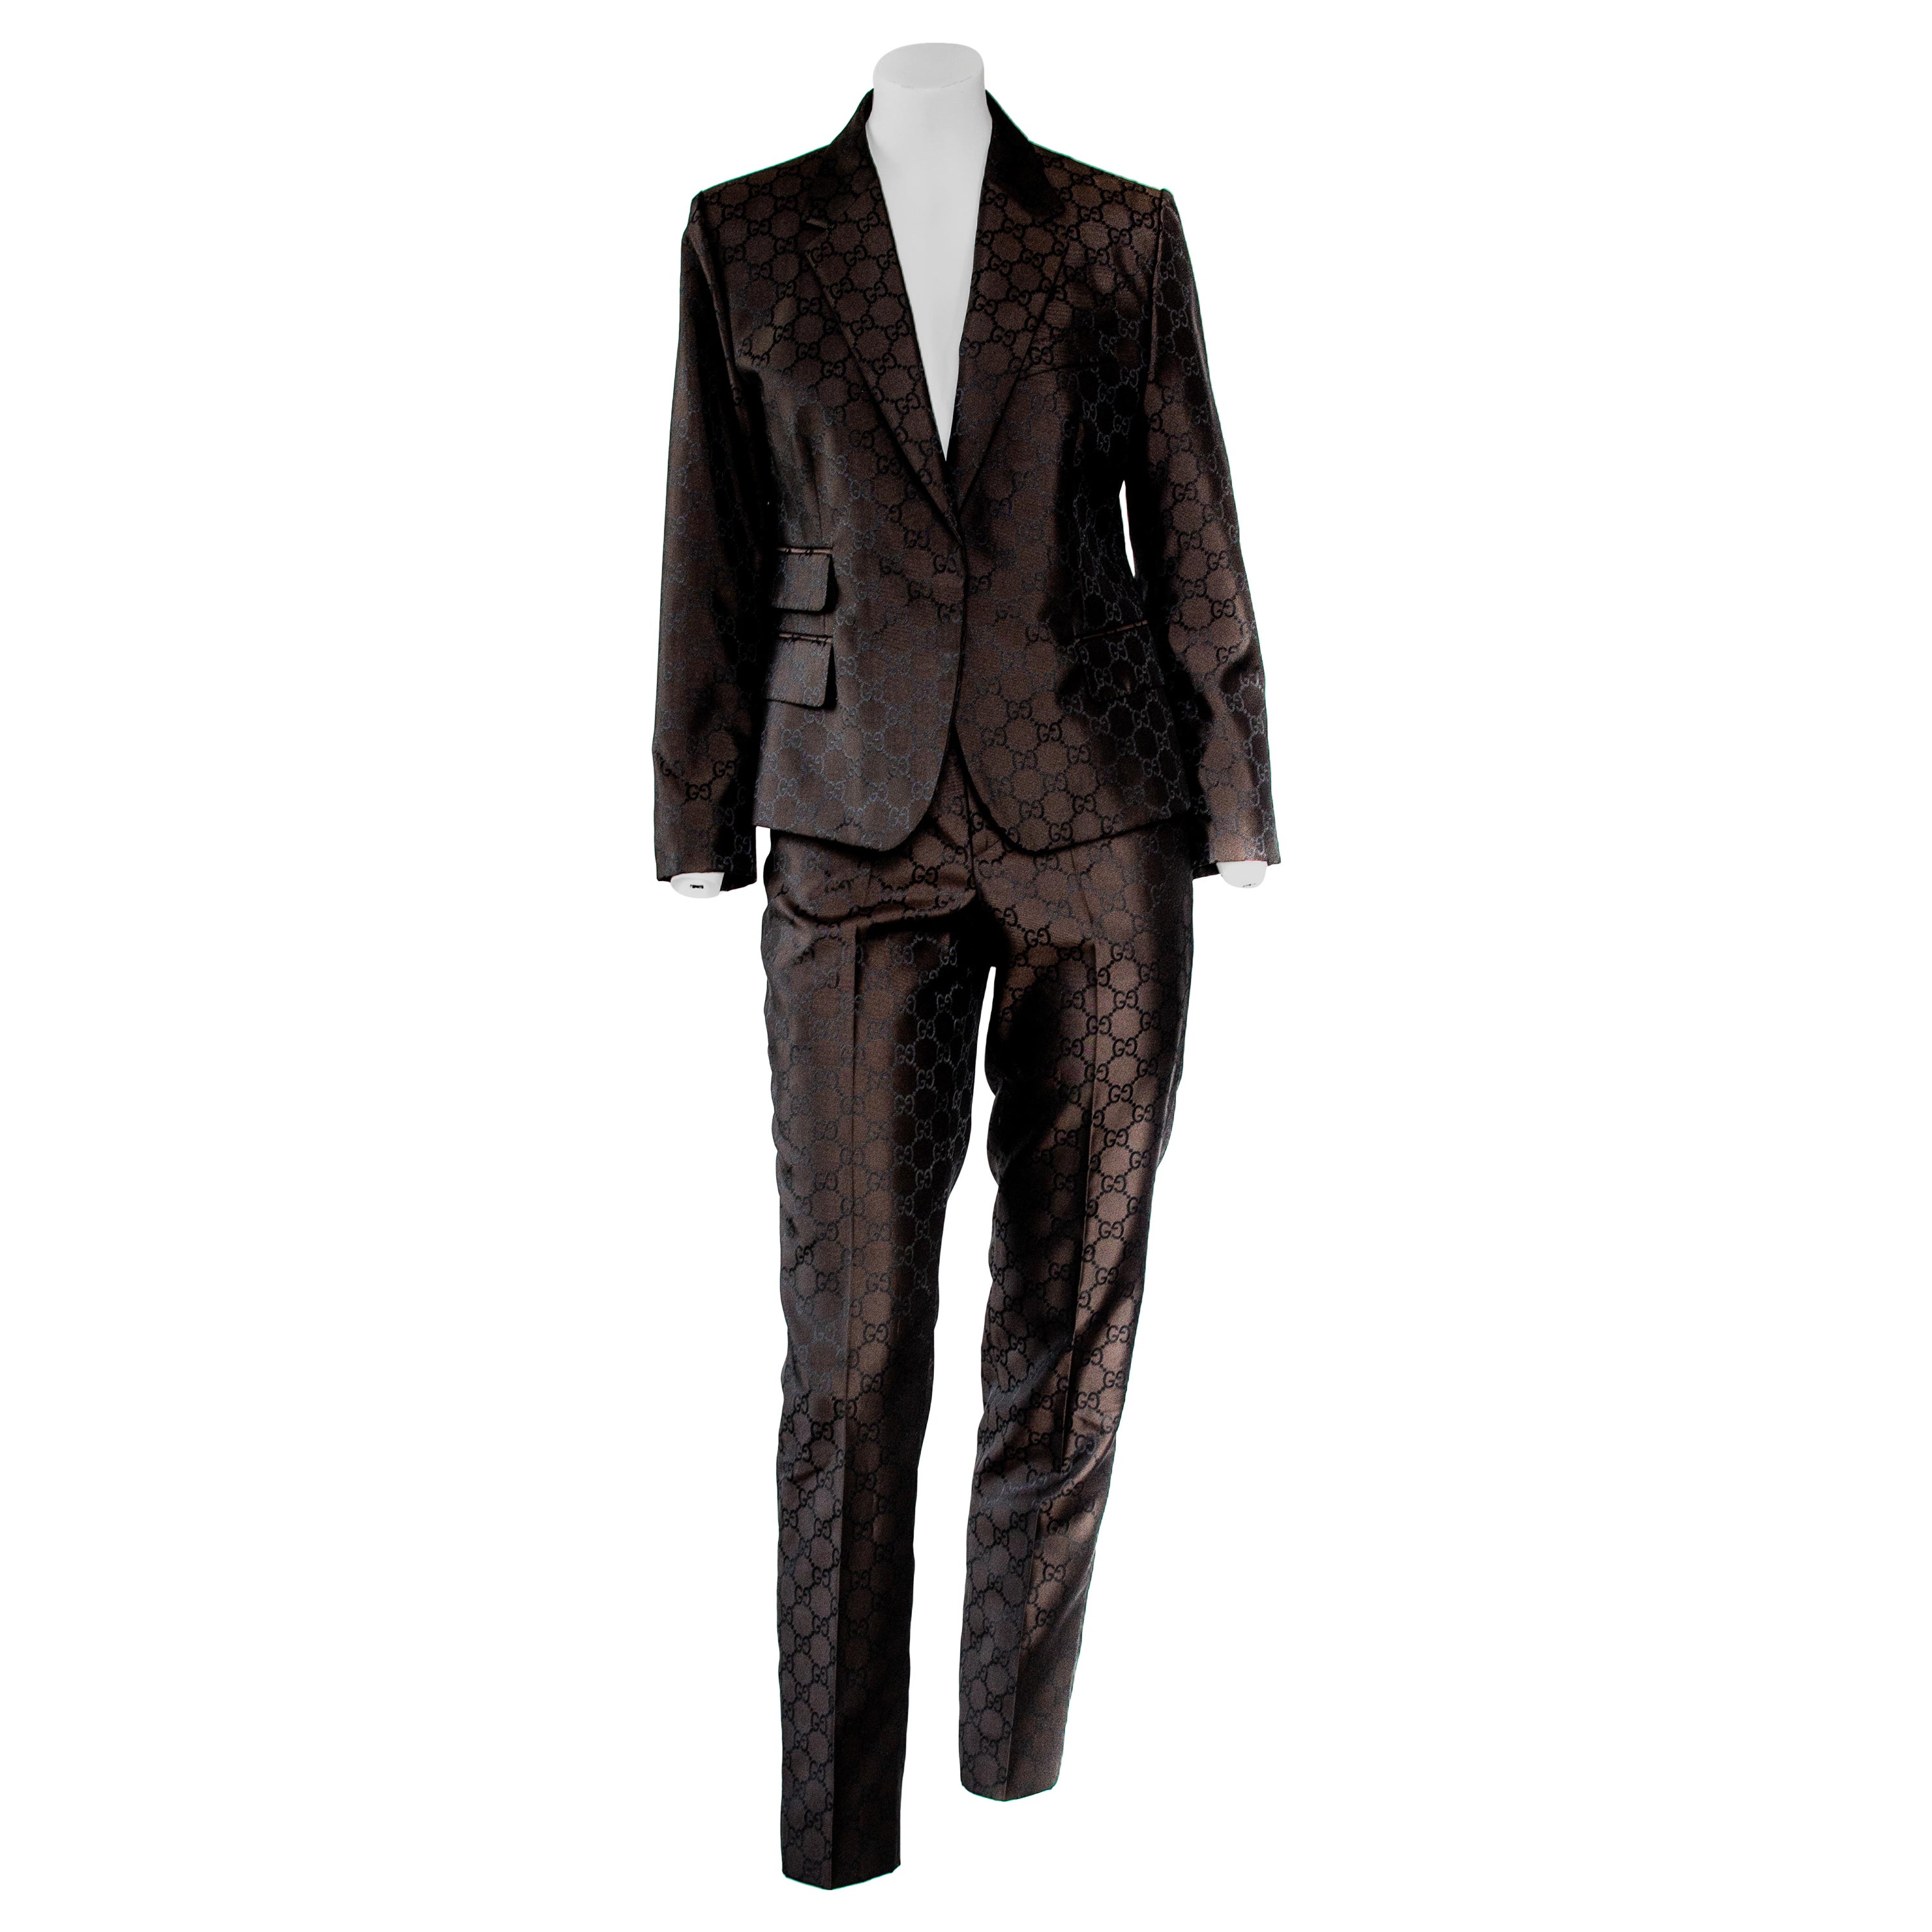 S/S 1998 Gucci by Tom Ford Woven GG Monogram Satin Brown Pantsuit